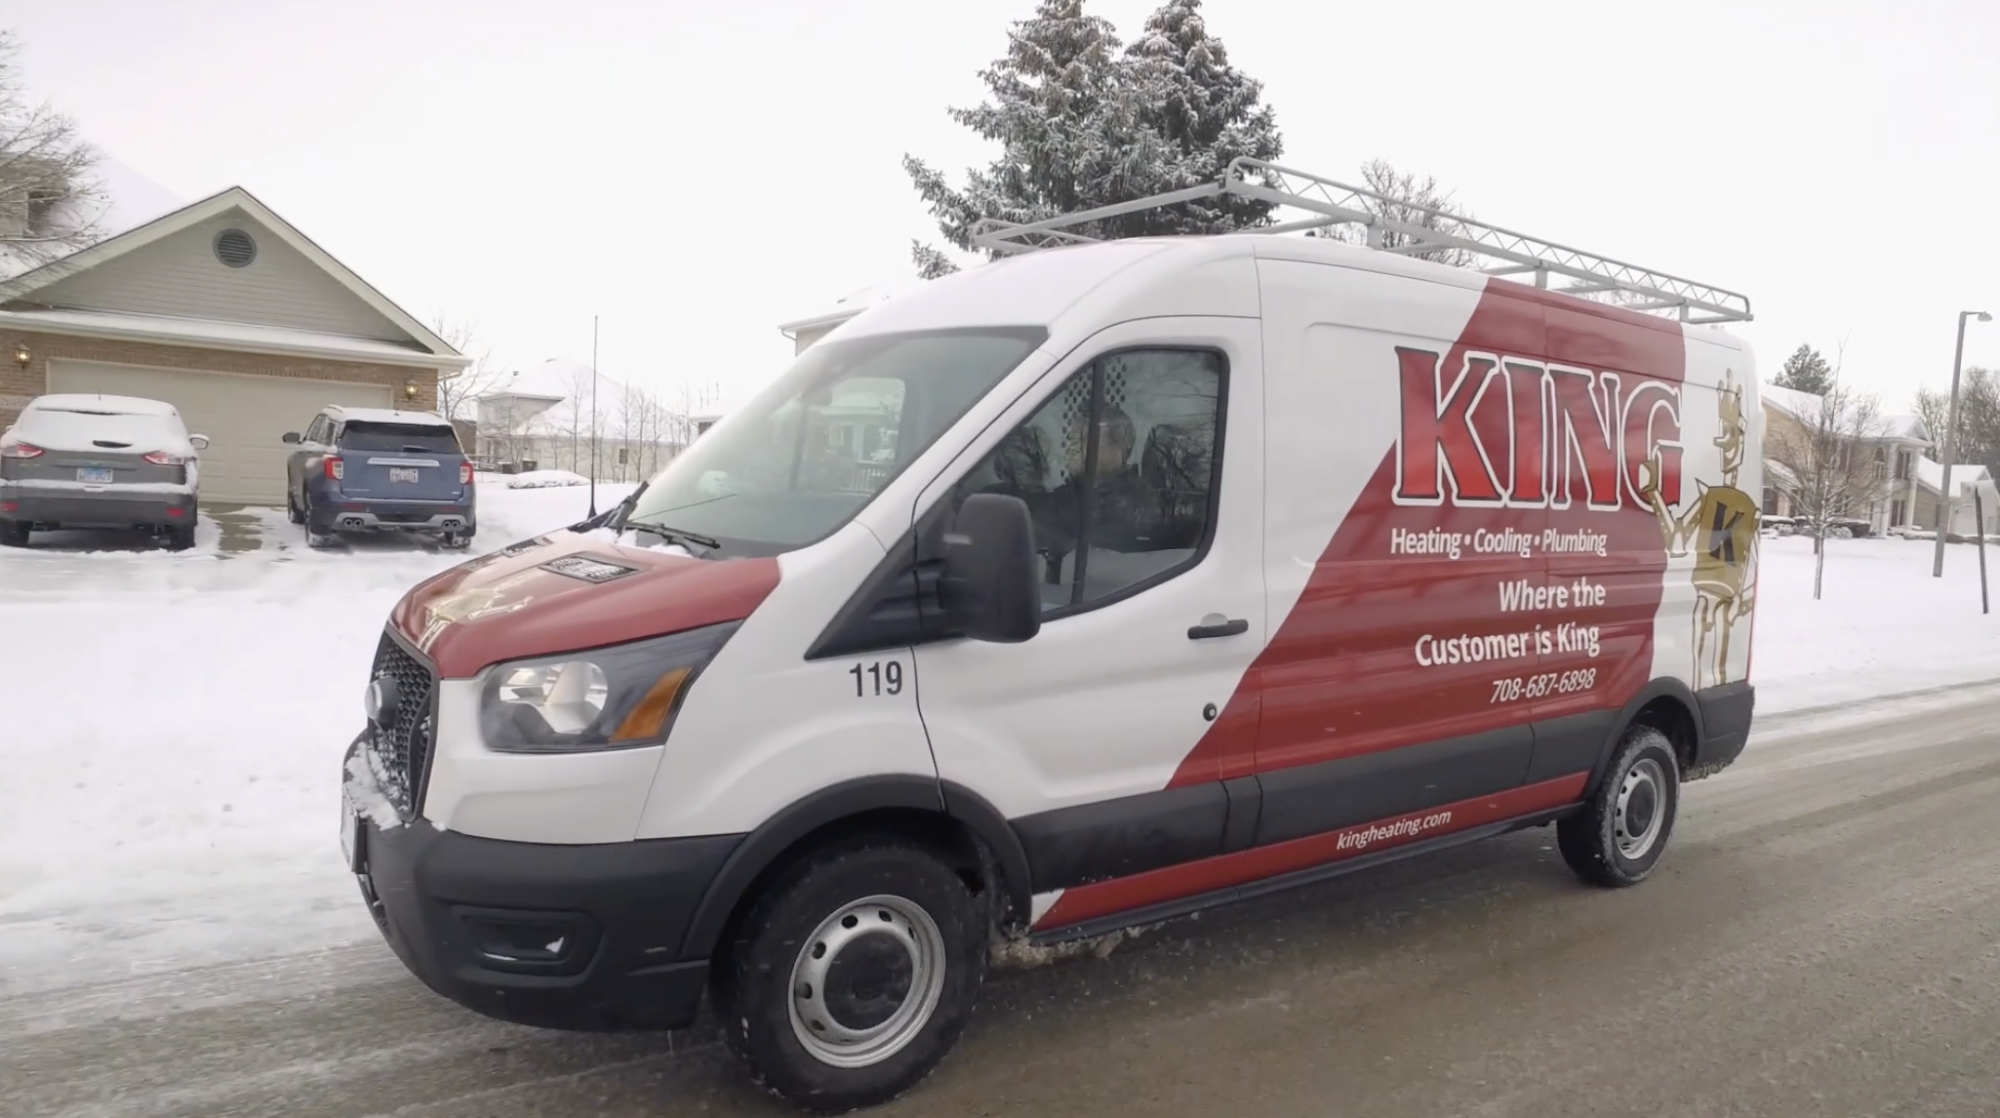 King Heating, Cooling & Plumbing 4813 W 159th St, Oak Forest Illinois 60452